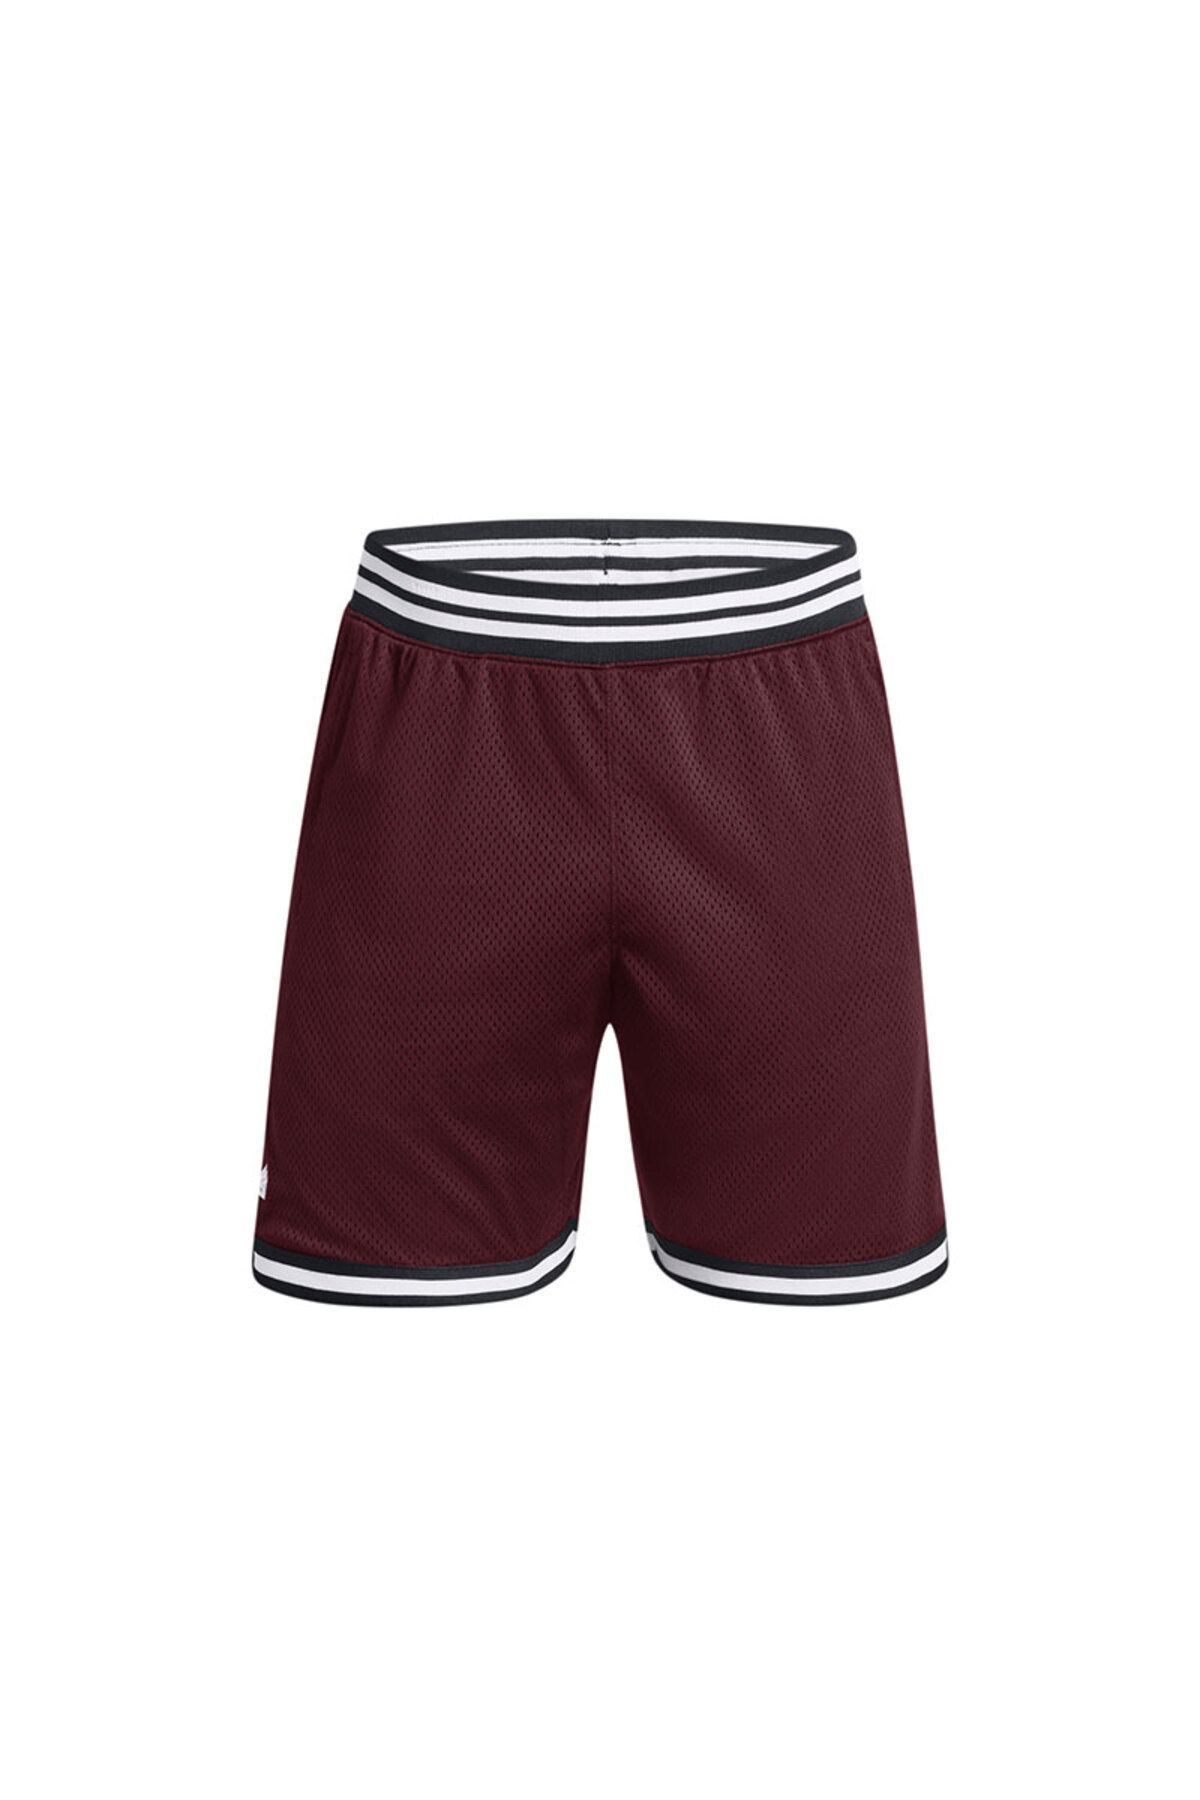 Under Armour Curry Mesh Short 3